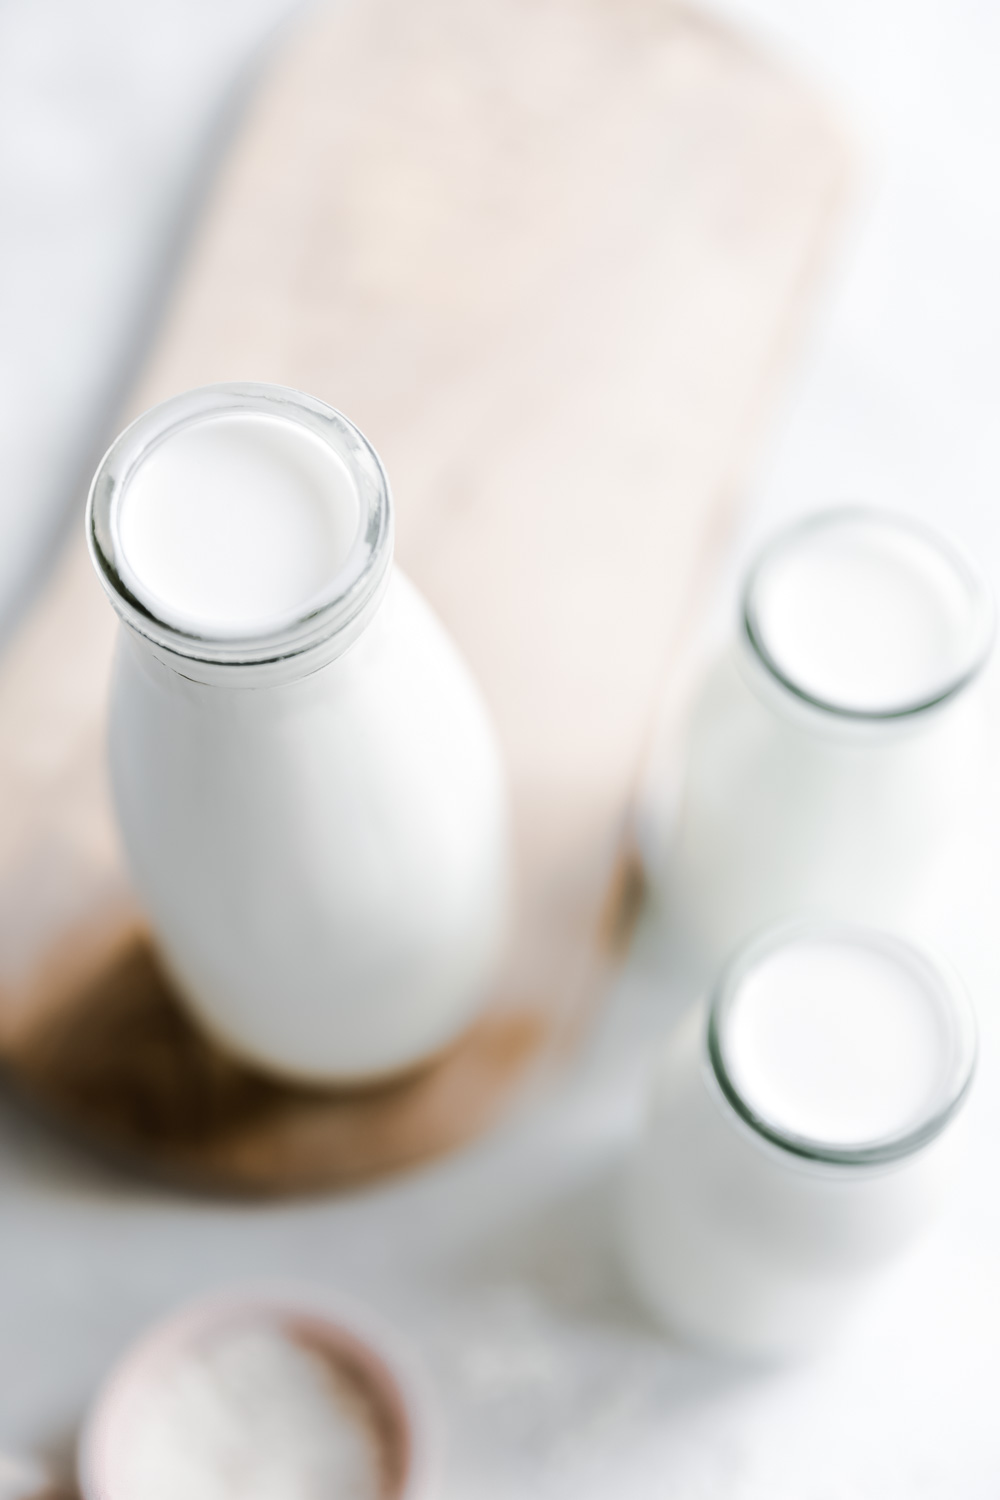 three different glass bottles with coconut milk from the top on white and wooden surface